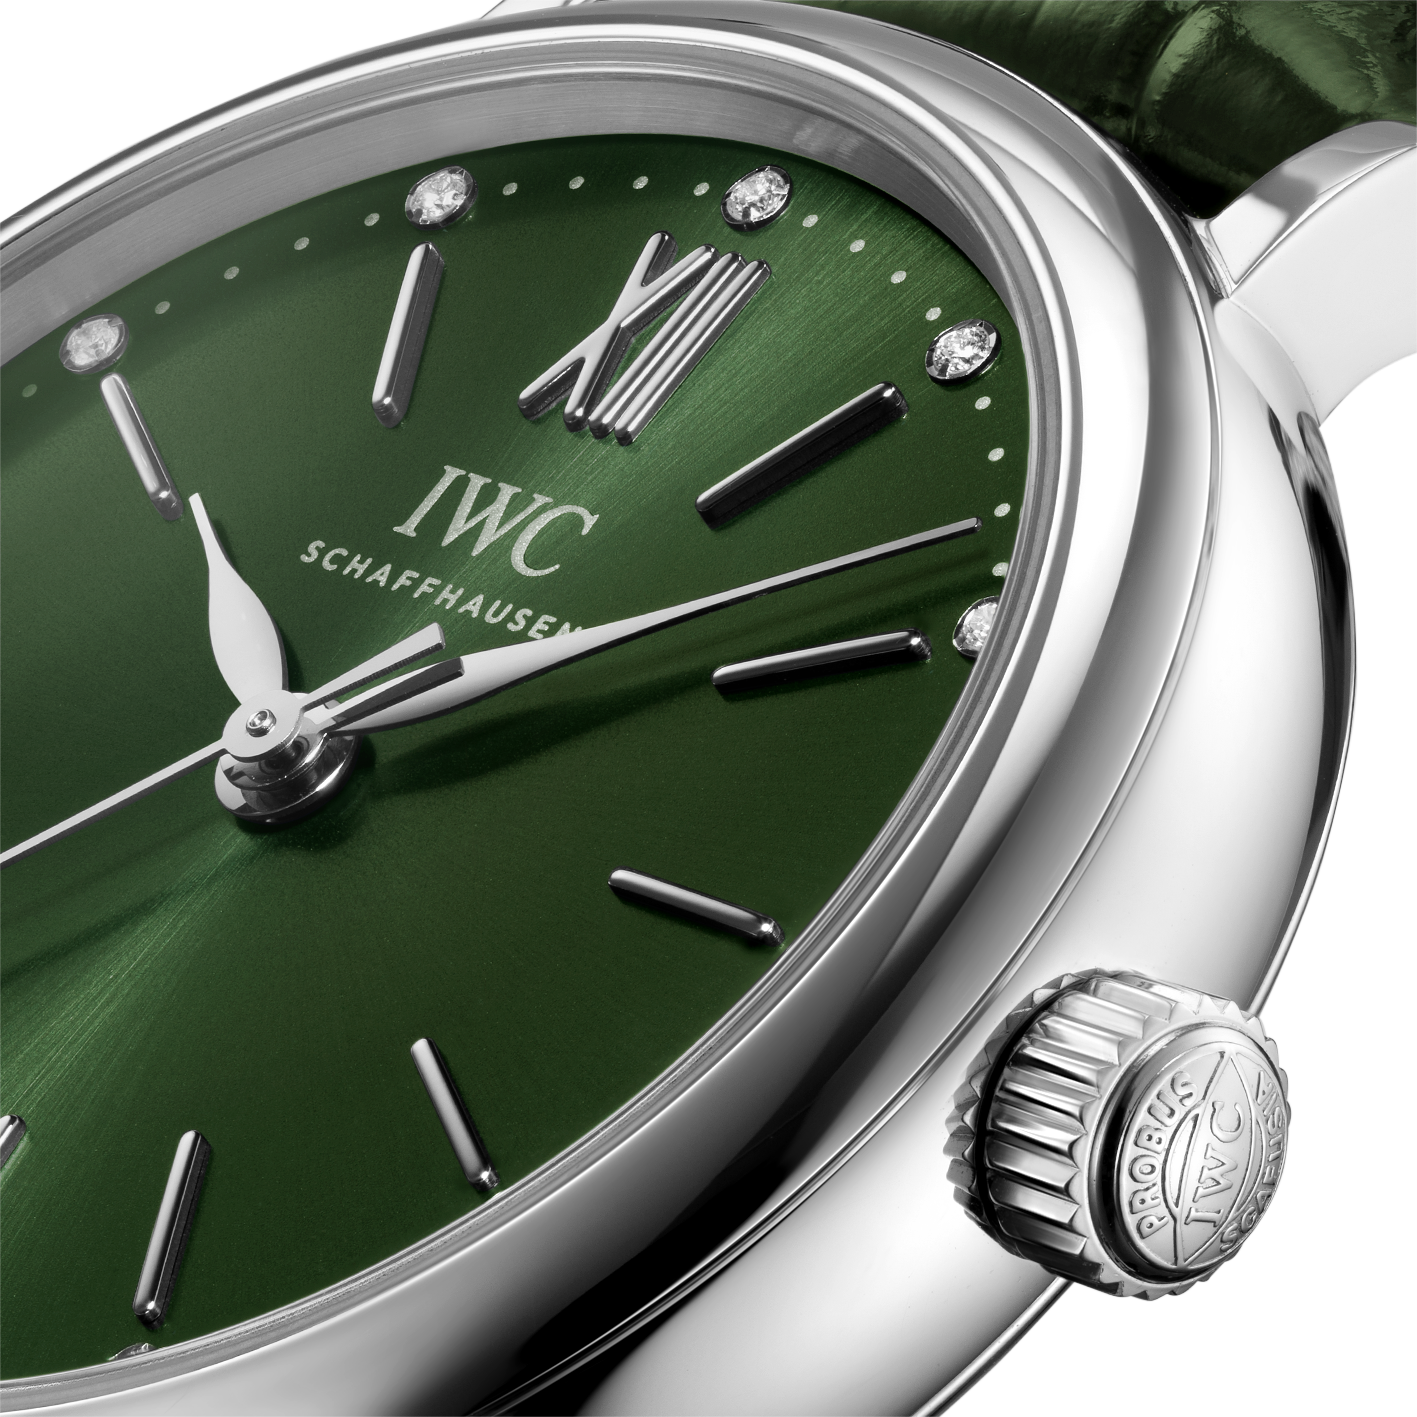 IWC Portofino Automatic Green Dial Green Leather Strap Watch for Women - IW357405